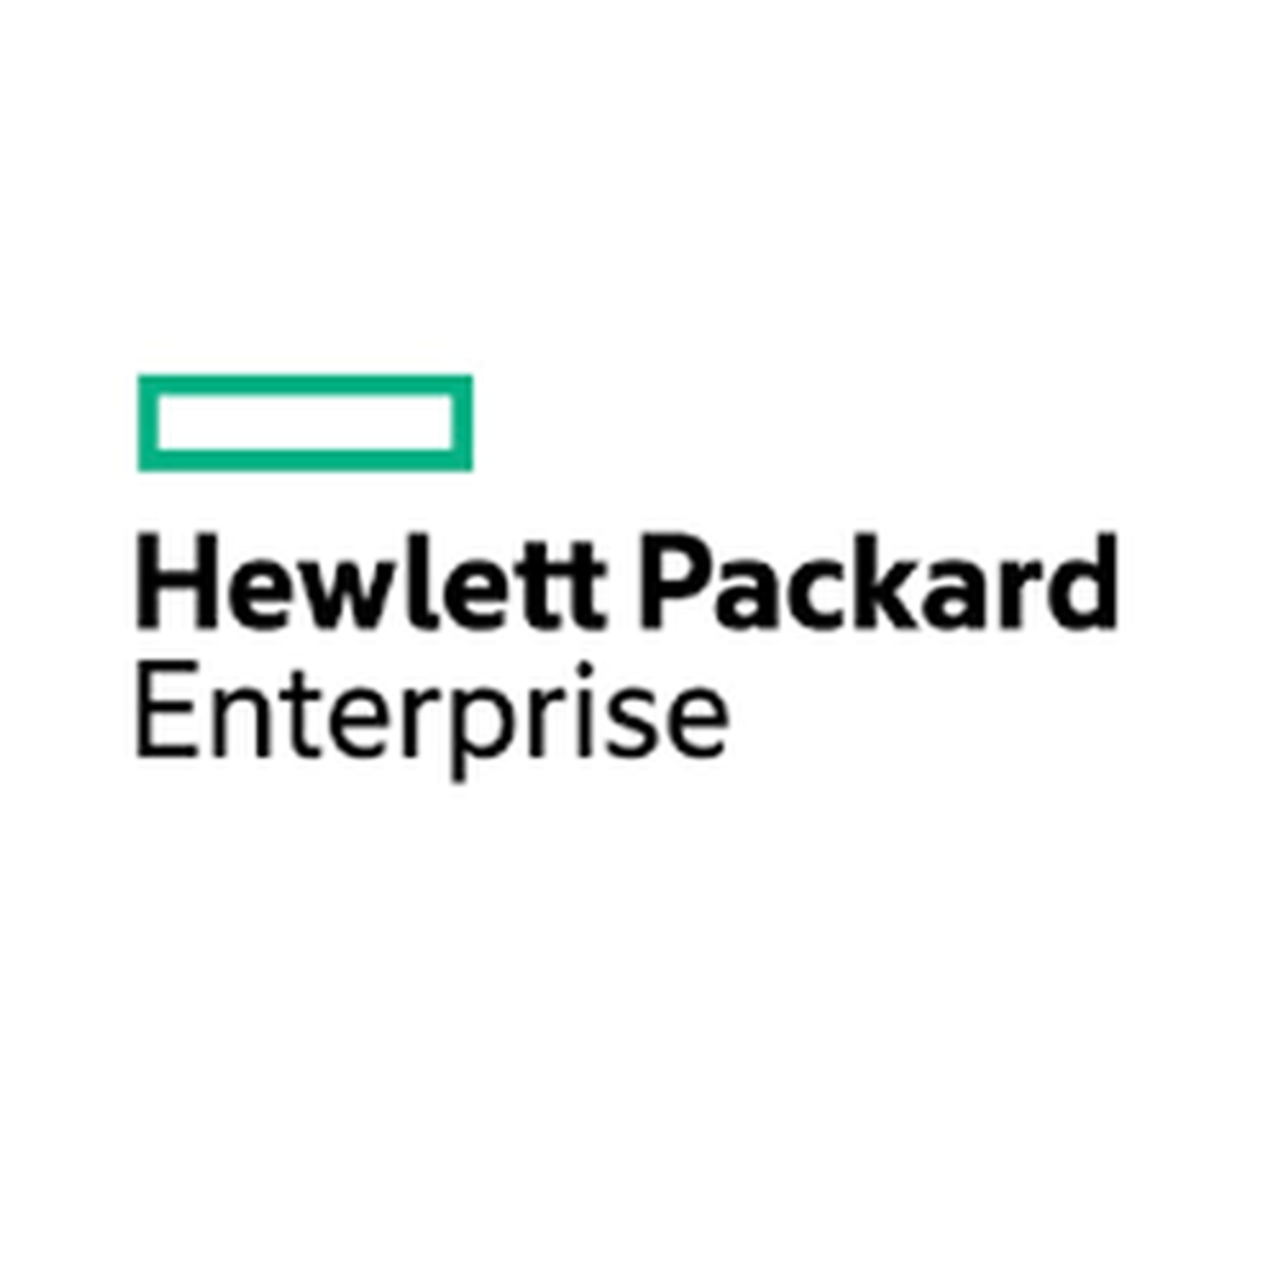 HPE Q SFP28 to SFP28 Reman Adapter Factory integrated (Sourcing) - HPE Discontinued Product)